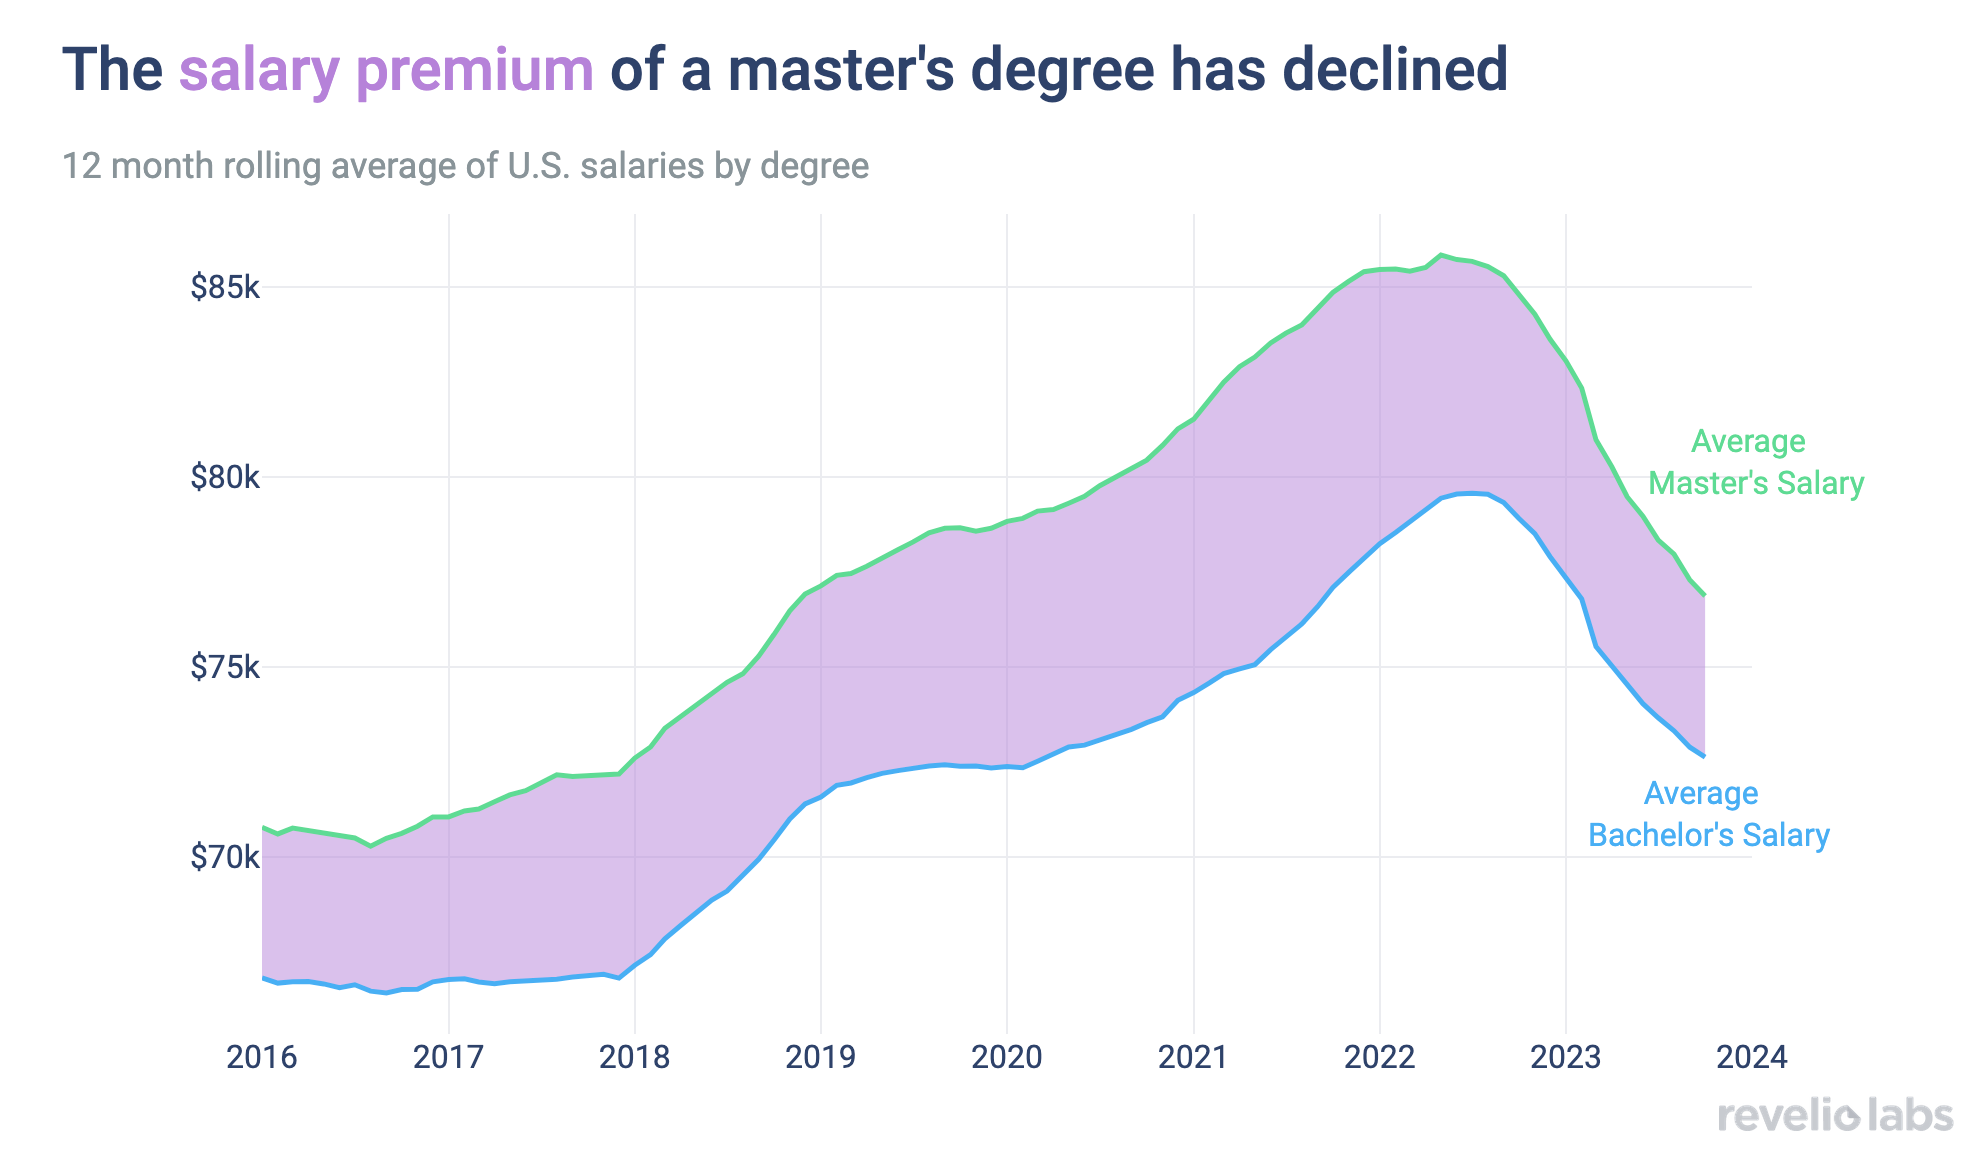 The salary premium of a master's degree has declined